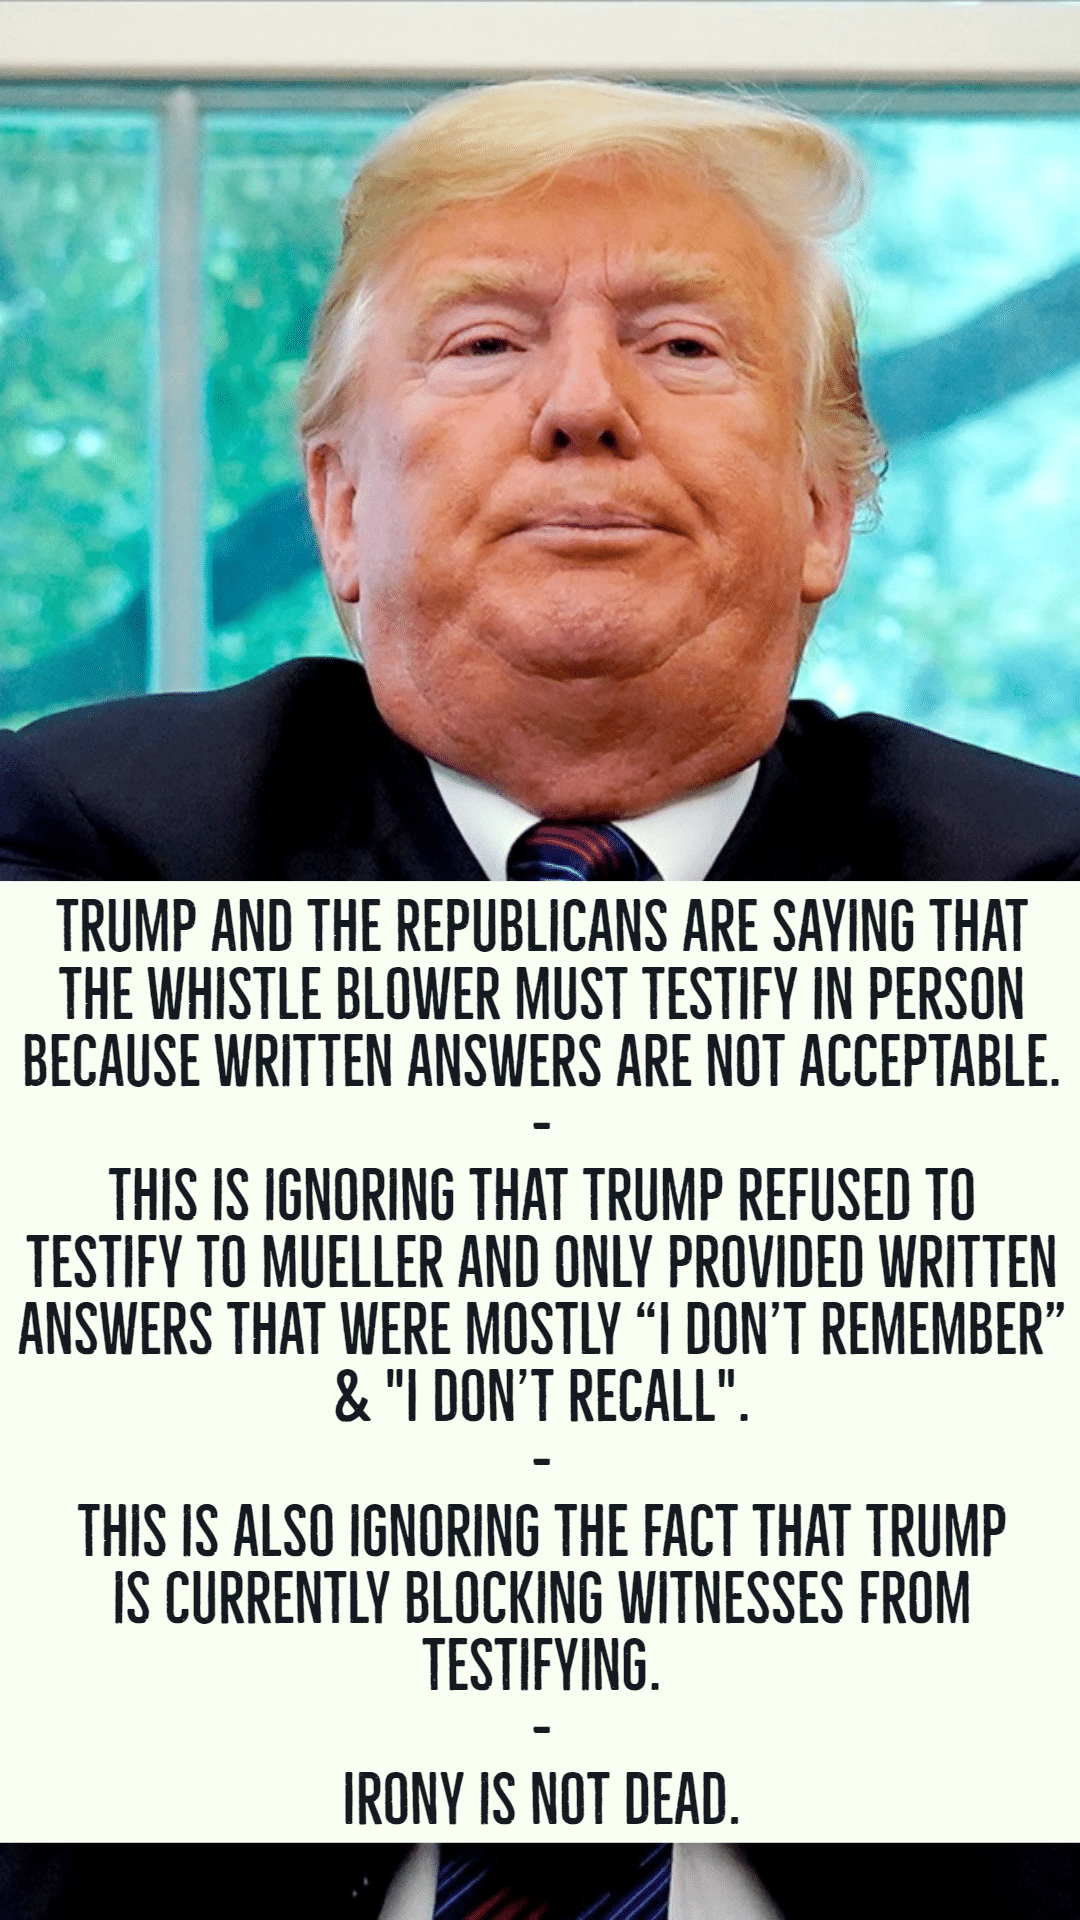 political political-memes political text: TRUMP AND THE REPUBLICANS ARE SAYING THAT THE WHISTLE BLOWER MUST TESTIFY IN PERSON BECAUSE WRITTEN ANSWERS ARE NOT ACCEPTABLE. THIS IS IGNORING THAT TRUMP REFUSED TO TESTIFY TO MUELLER AND ONLY PROVIDED WRITTEN ANSWERS THAT WERE MOSTLY 